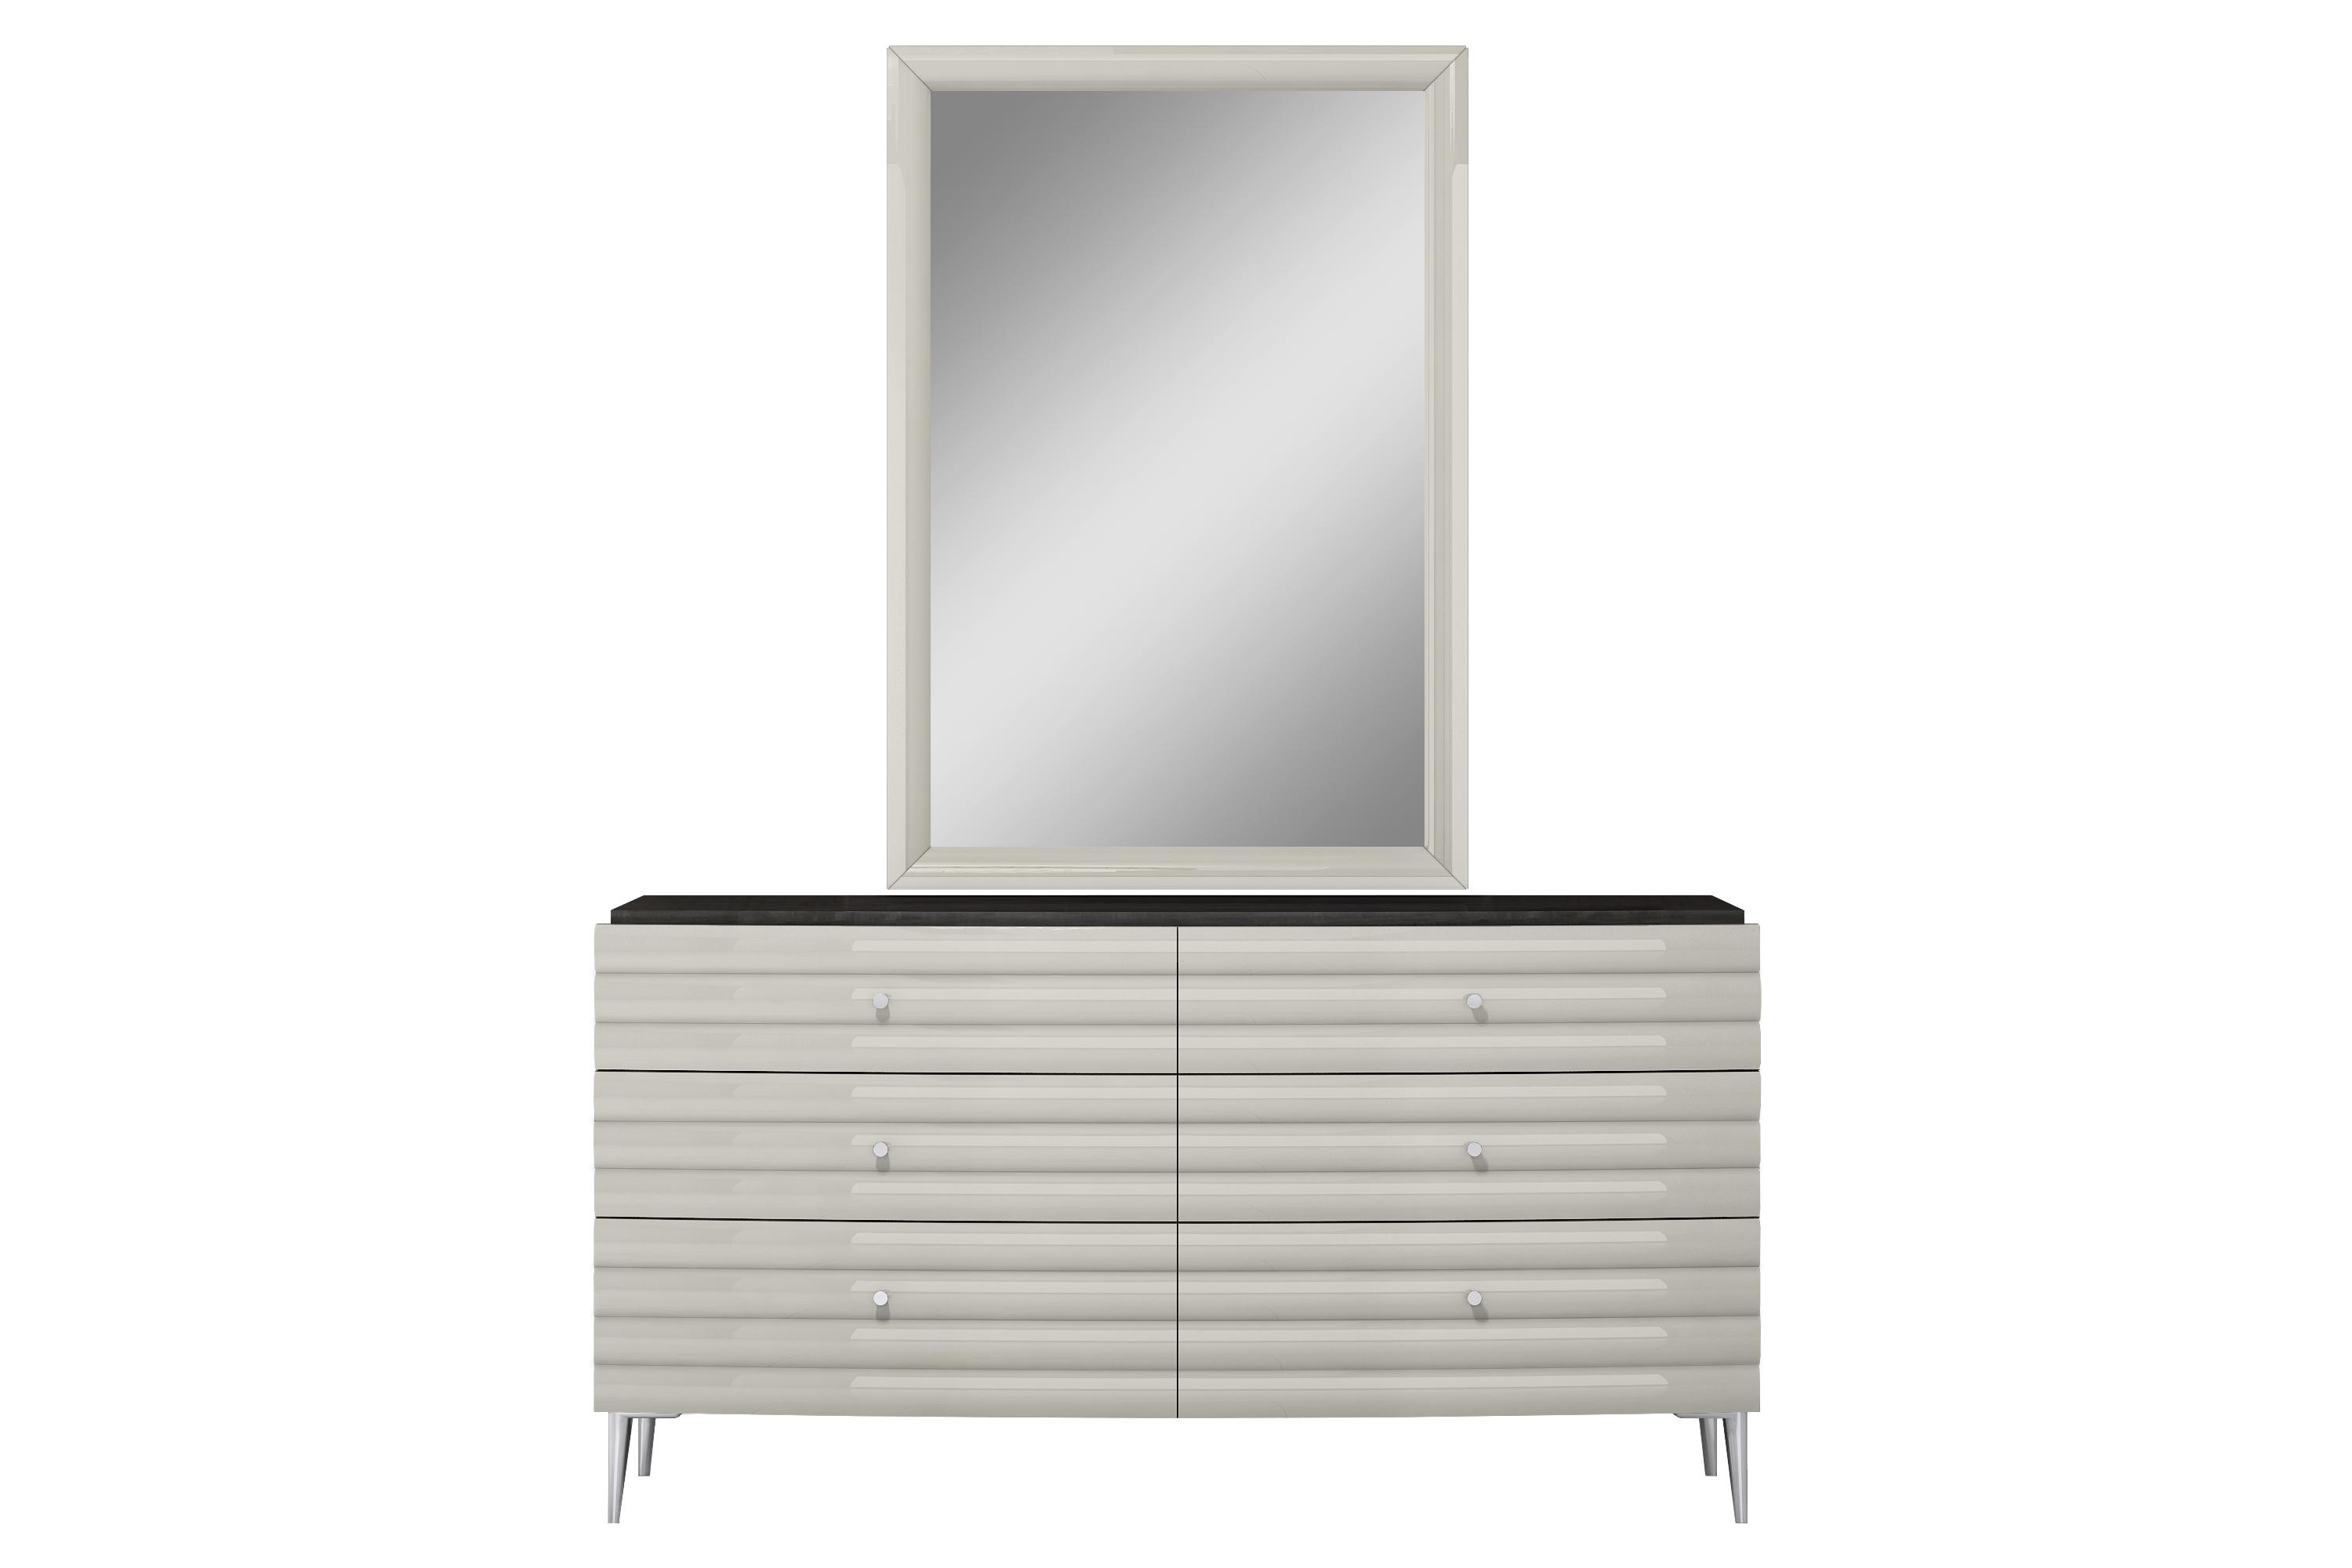 

    
Contemporary High Gloss Dark Gray Solid Wood Dresser w/Mirror WhiteLine DR1752-DGRY/LGRY Pino
